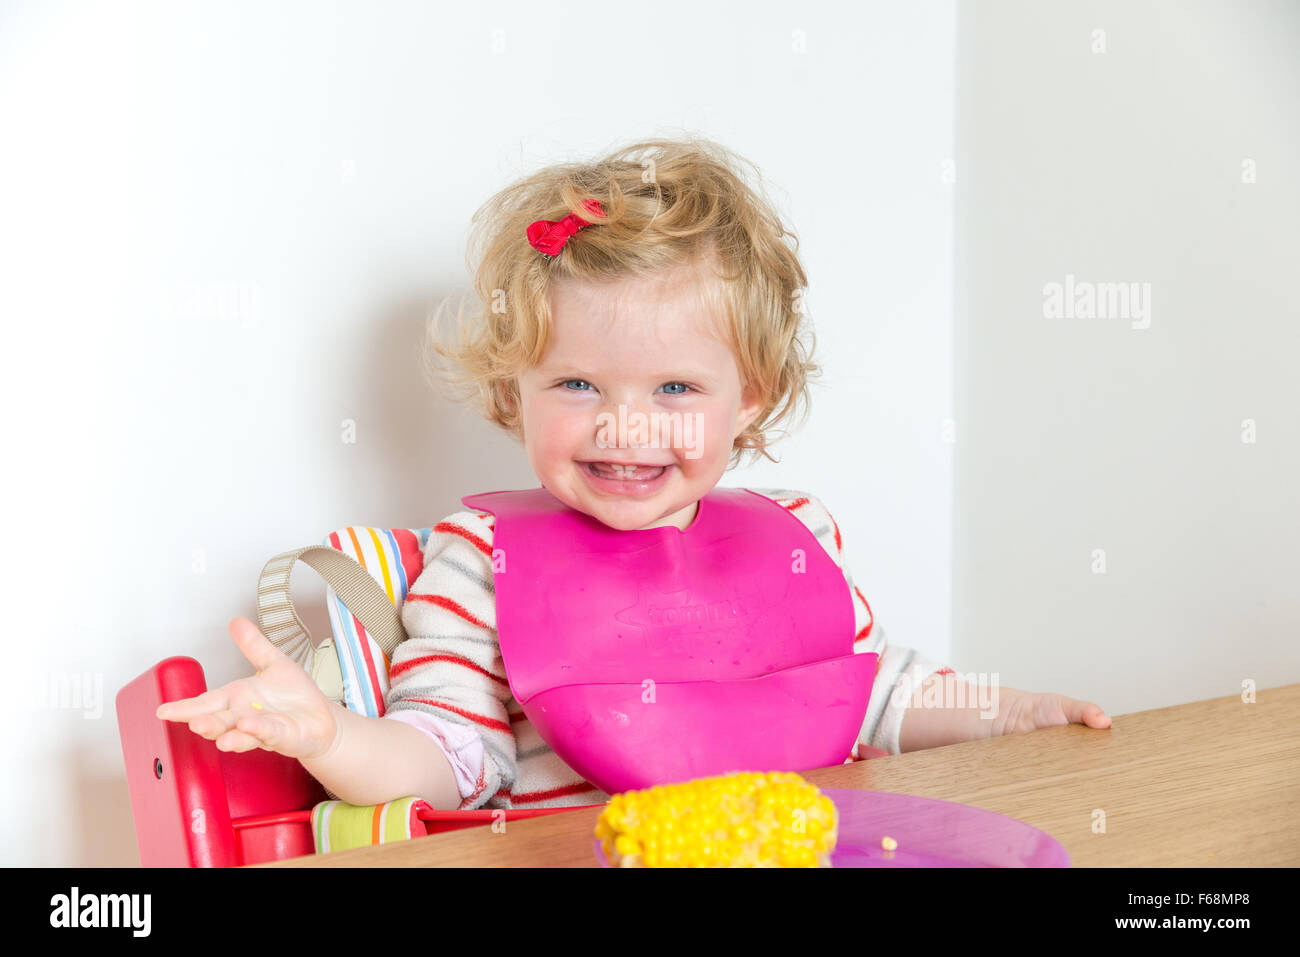 One year old baby smiling at the dinner table, England, UK Stock Photo